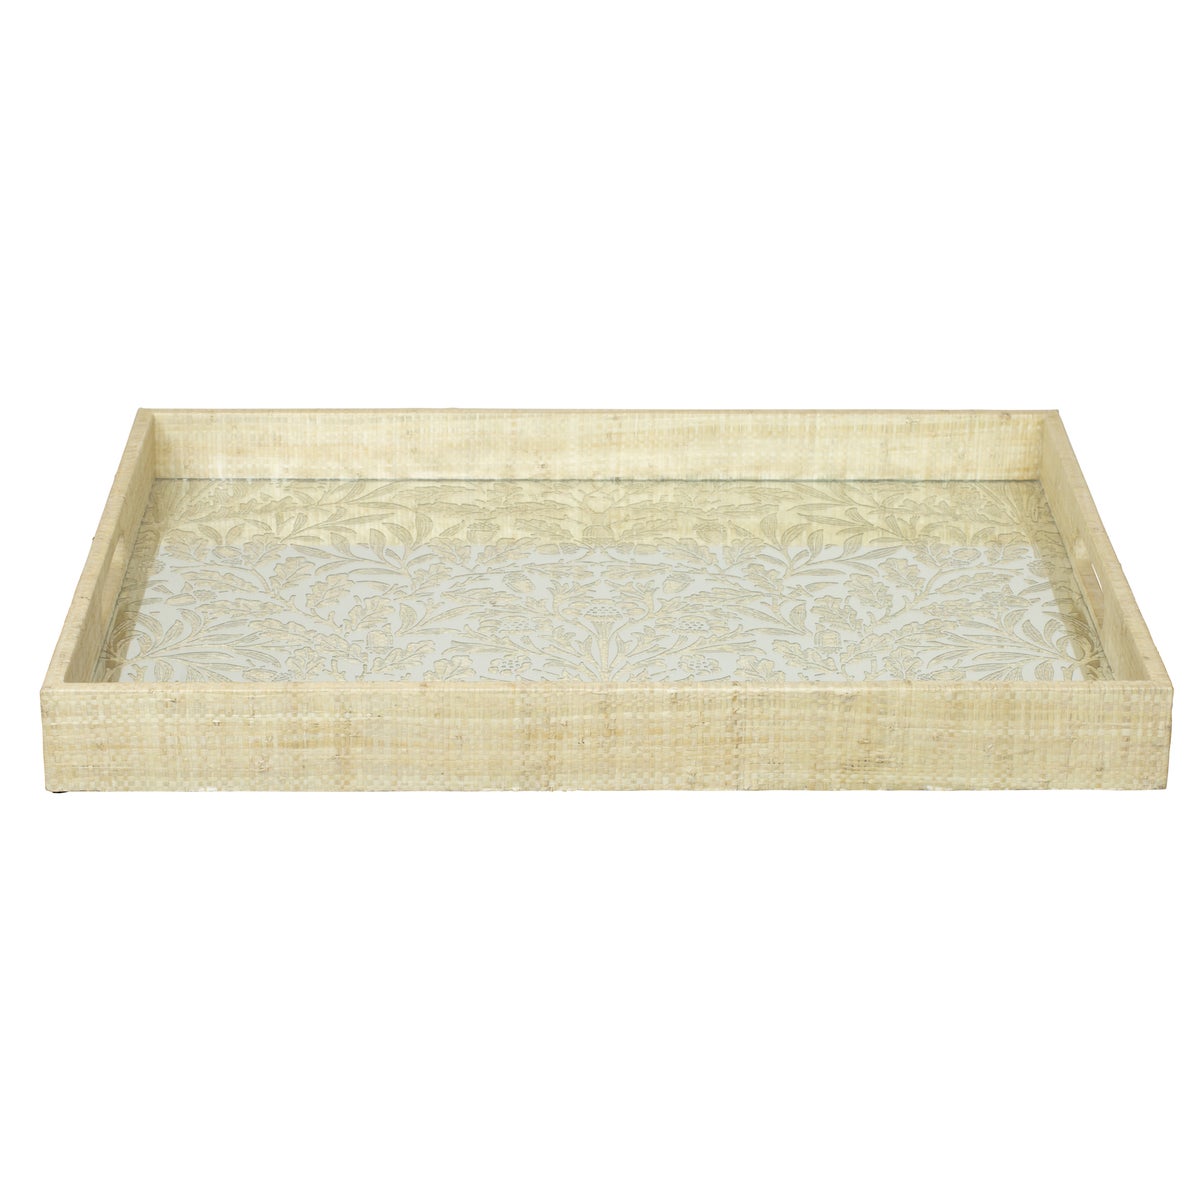 Acorn Tray in Natural